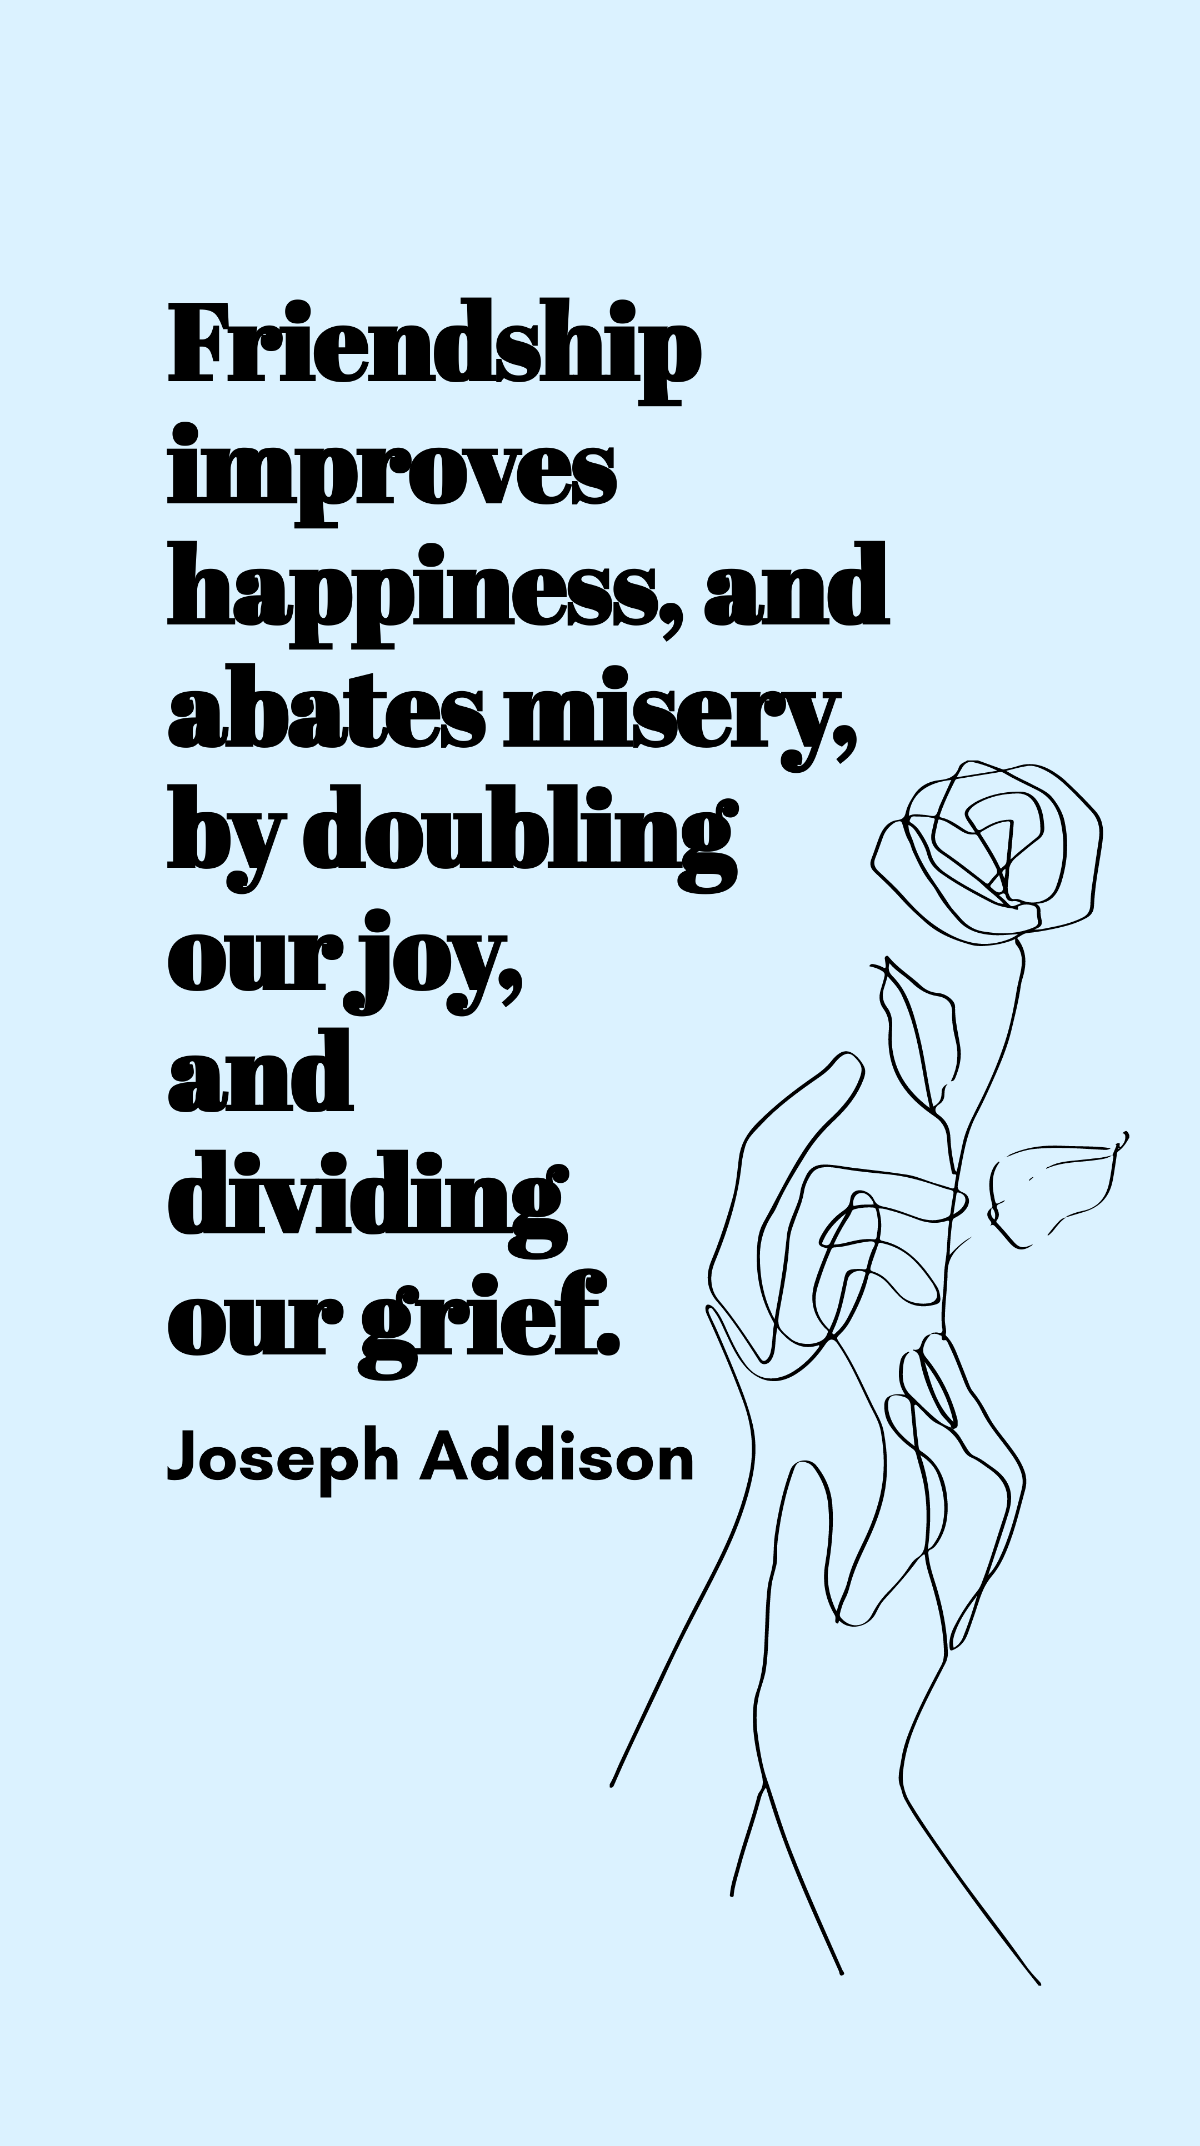 Joseph Addison - Friendship improves happiness, and abates misery, by doubling our joy, and dividing our grief. Template